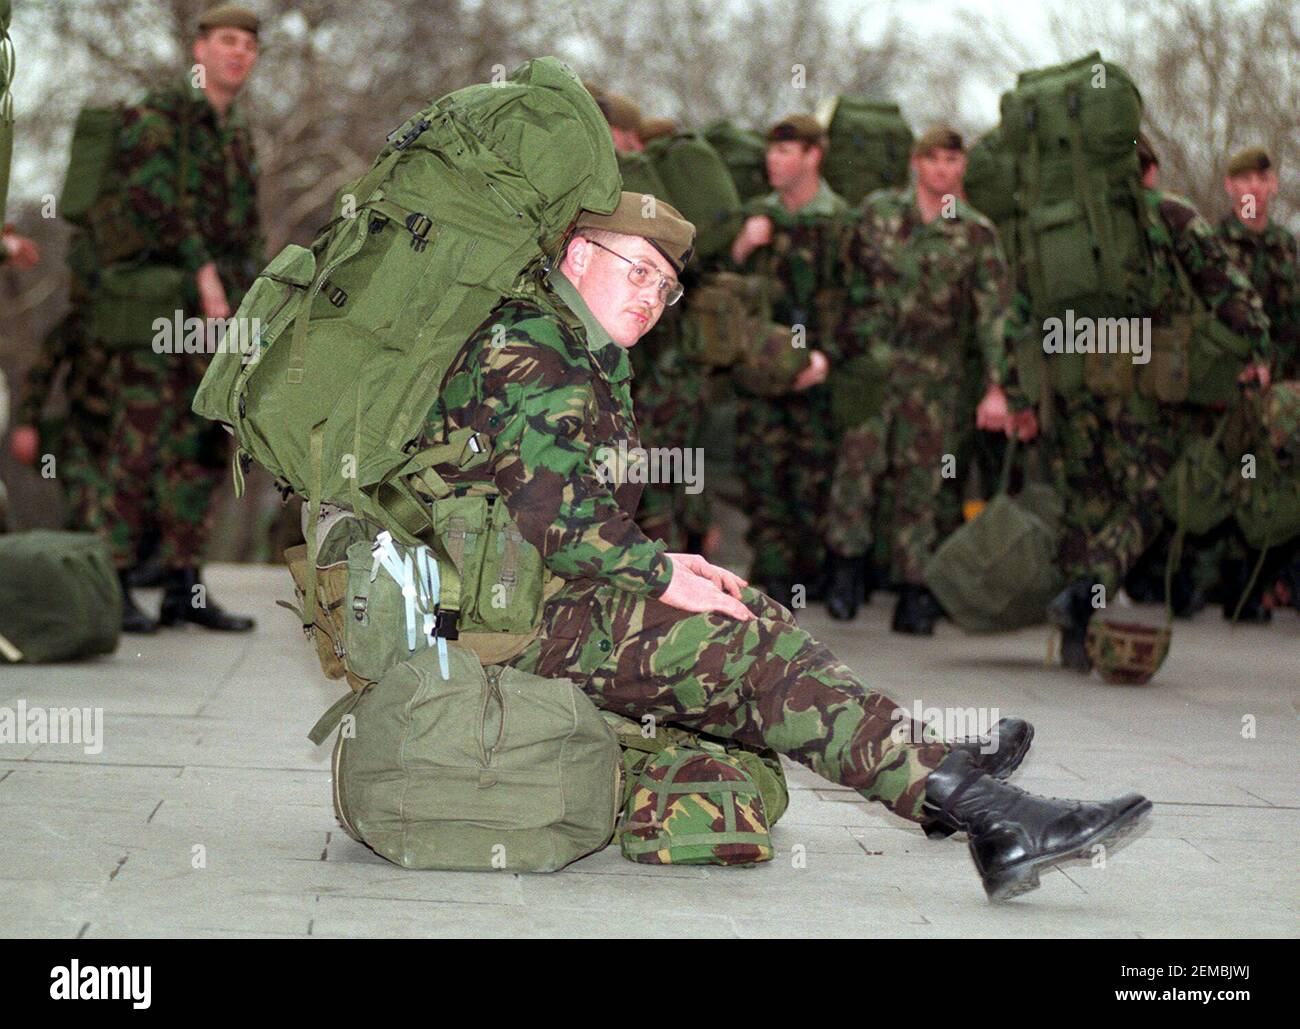 File photo dated 23/01/91 of Guardsman Sean Richard Bower from Hull, of the Coldstream Guards, whose duties will include guarding prisoners of war in the Gulf conflict, waits with his comrades for departure to the Gulf. Issue date: Thursday February 25, 2021. Margaret Thatcher was urged by a government colleague not to embark on a smear campaign against Saddam Hussein at the start of the Gulf War amid concerns over Britain's arms dealings with the Iraqi regime, previously classified papers reveal. Foreign Office minister William Waldegrave said 'propaganda' against Saddam, requested by the the Stock Photo